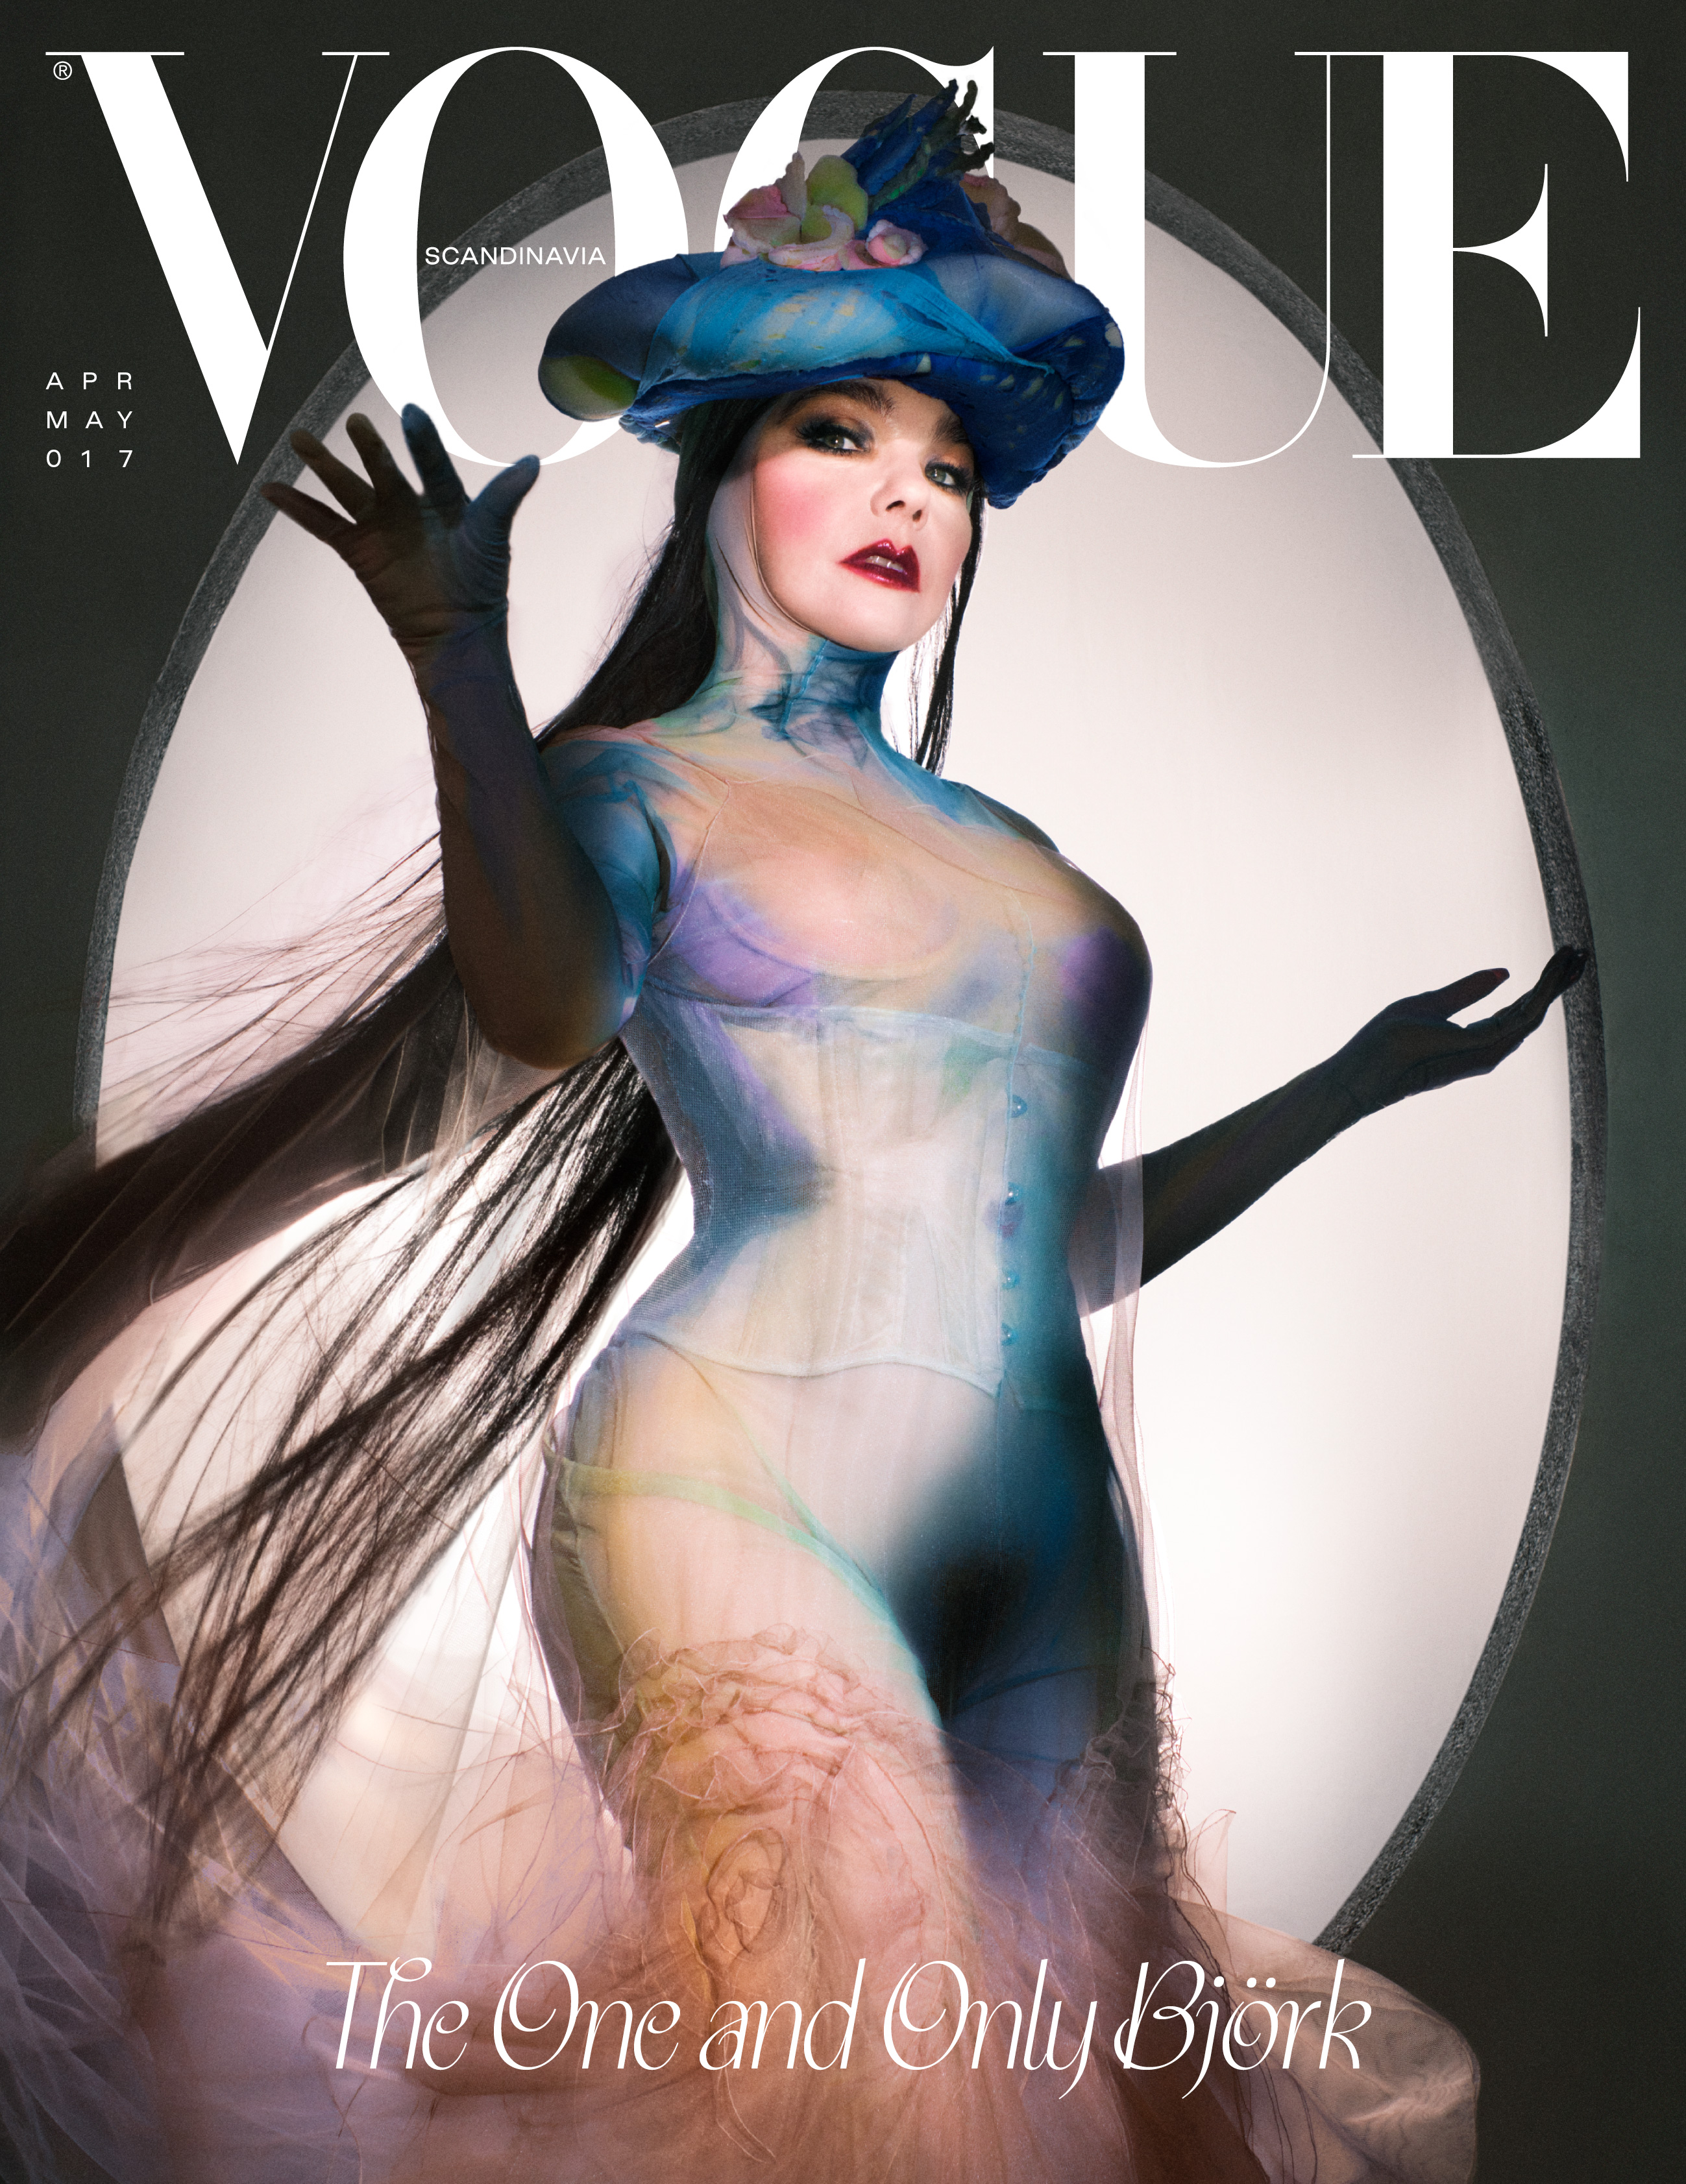 Fans gushed over Björk's Vogue cover in the Maison Margiela look, and were shocked at her age